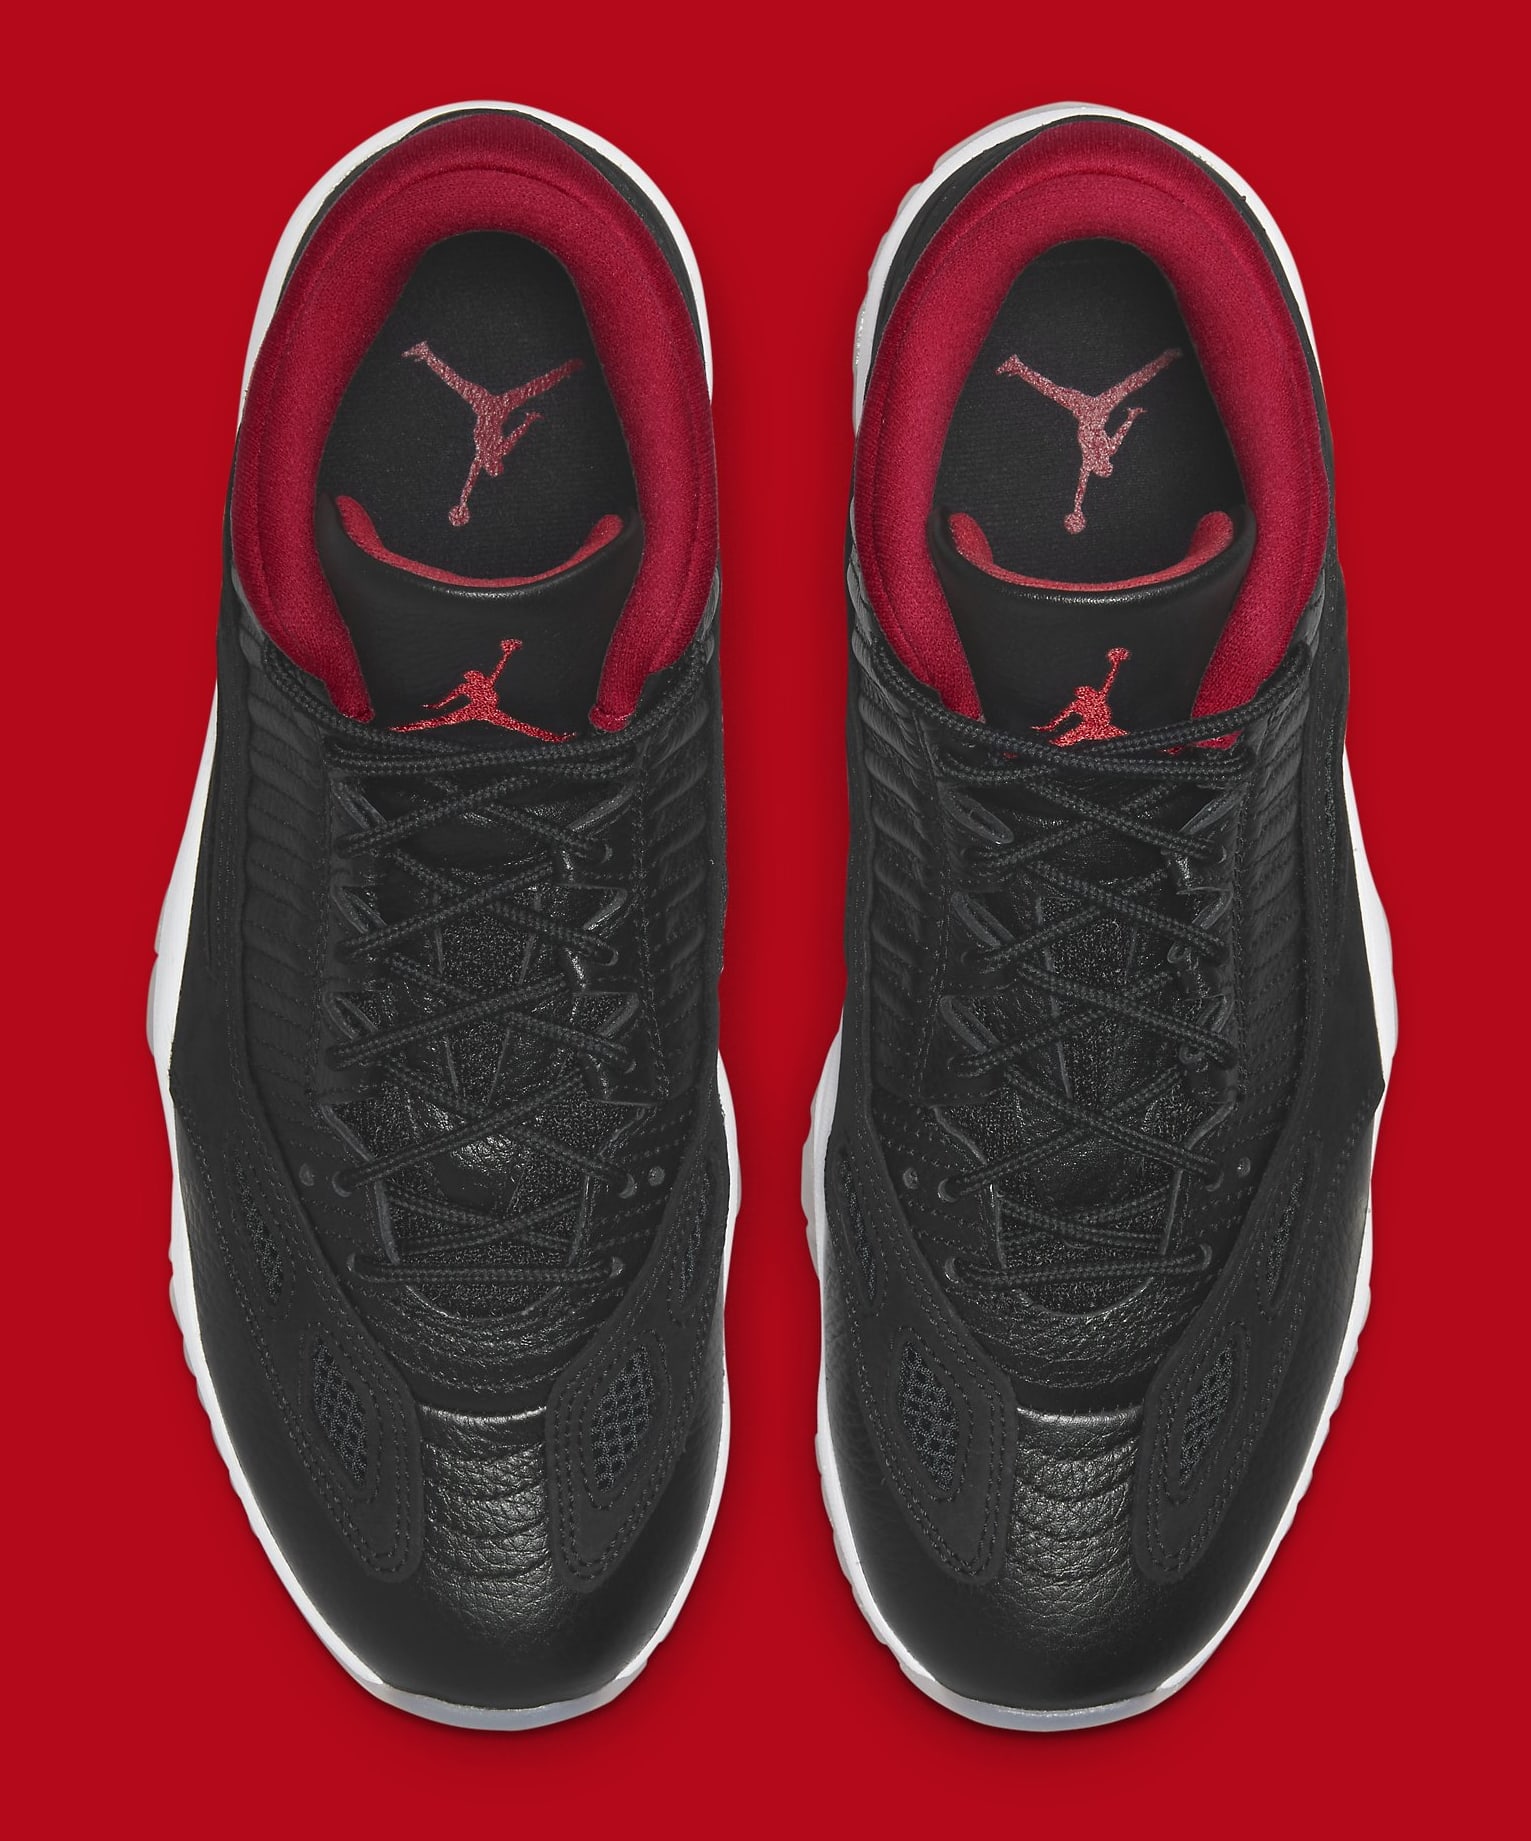 Best Look Yet at the 'Bred' Air Jordan 11 Low IE | Complex